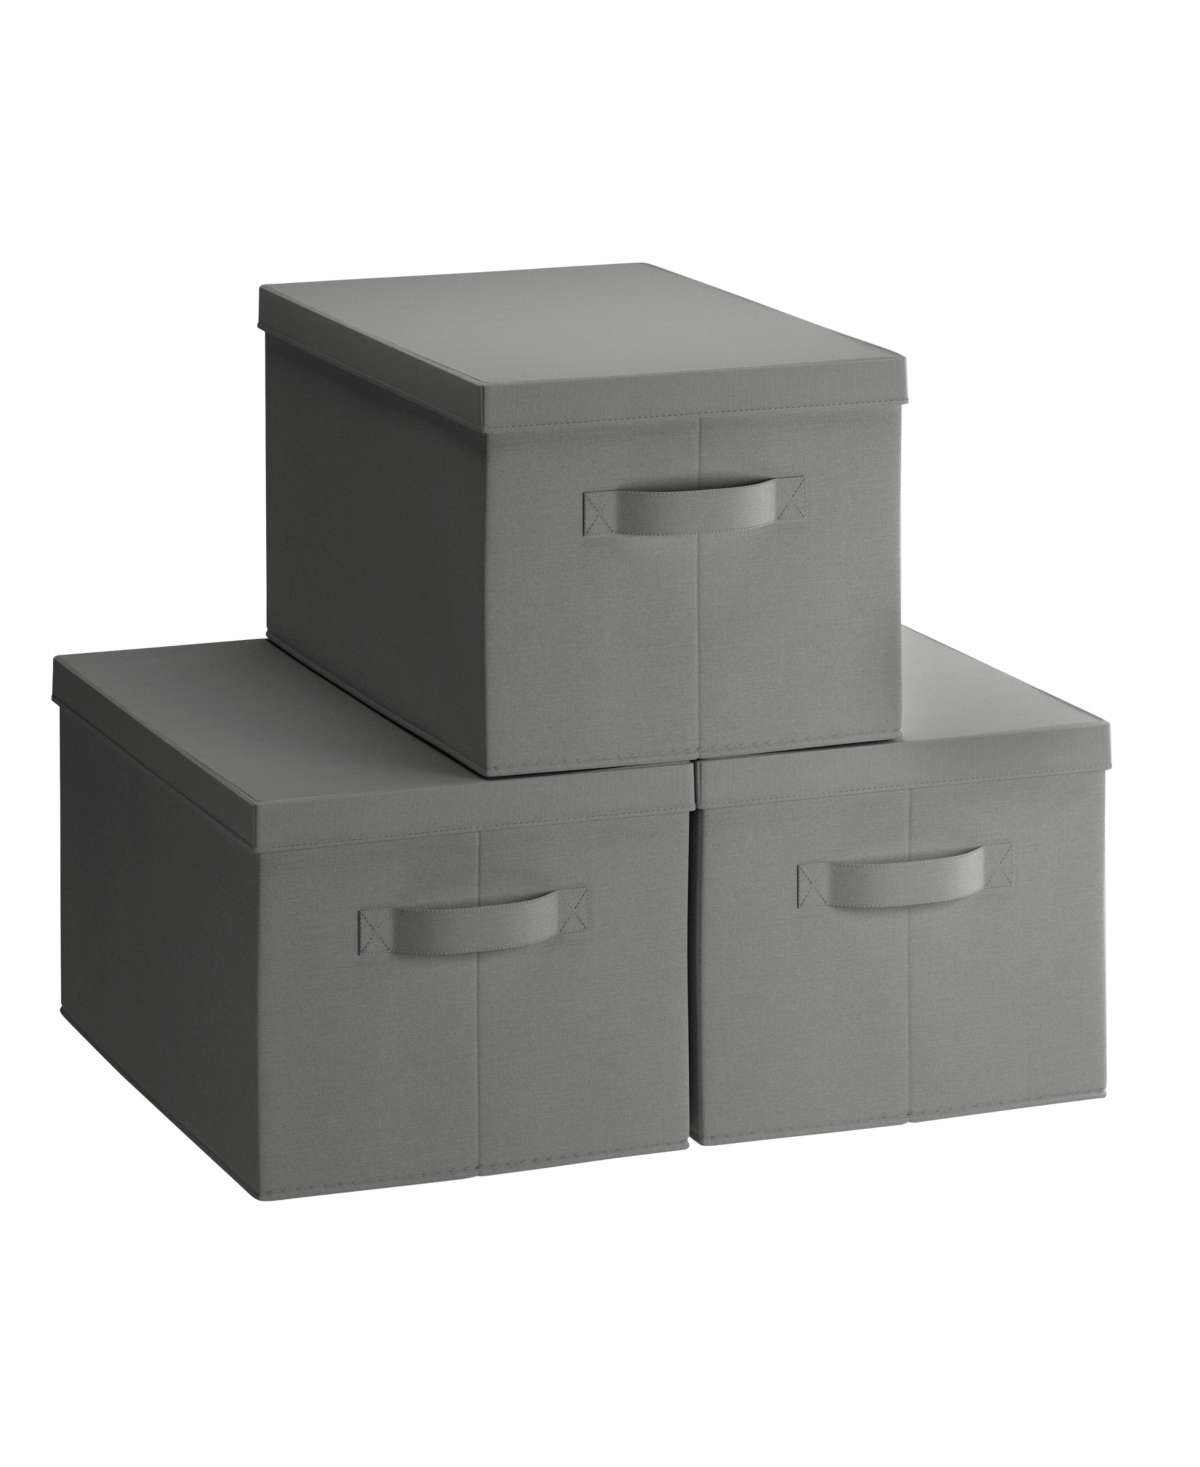 Ornavo Home Foldable Xlarge Storage Bin With Handles And Lid In Gray